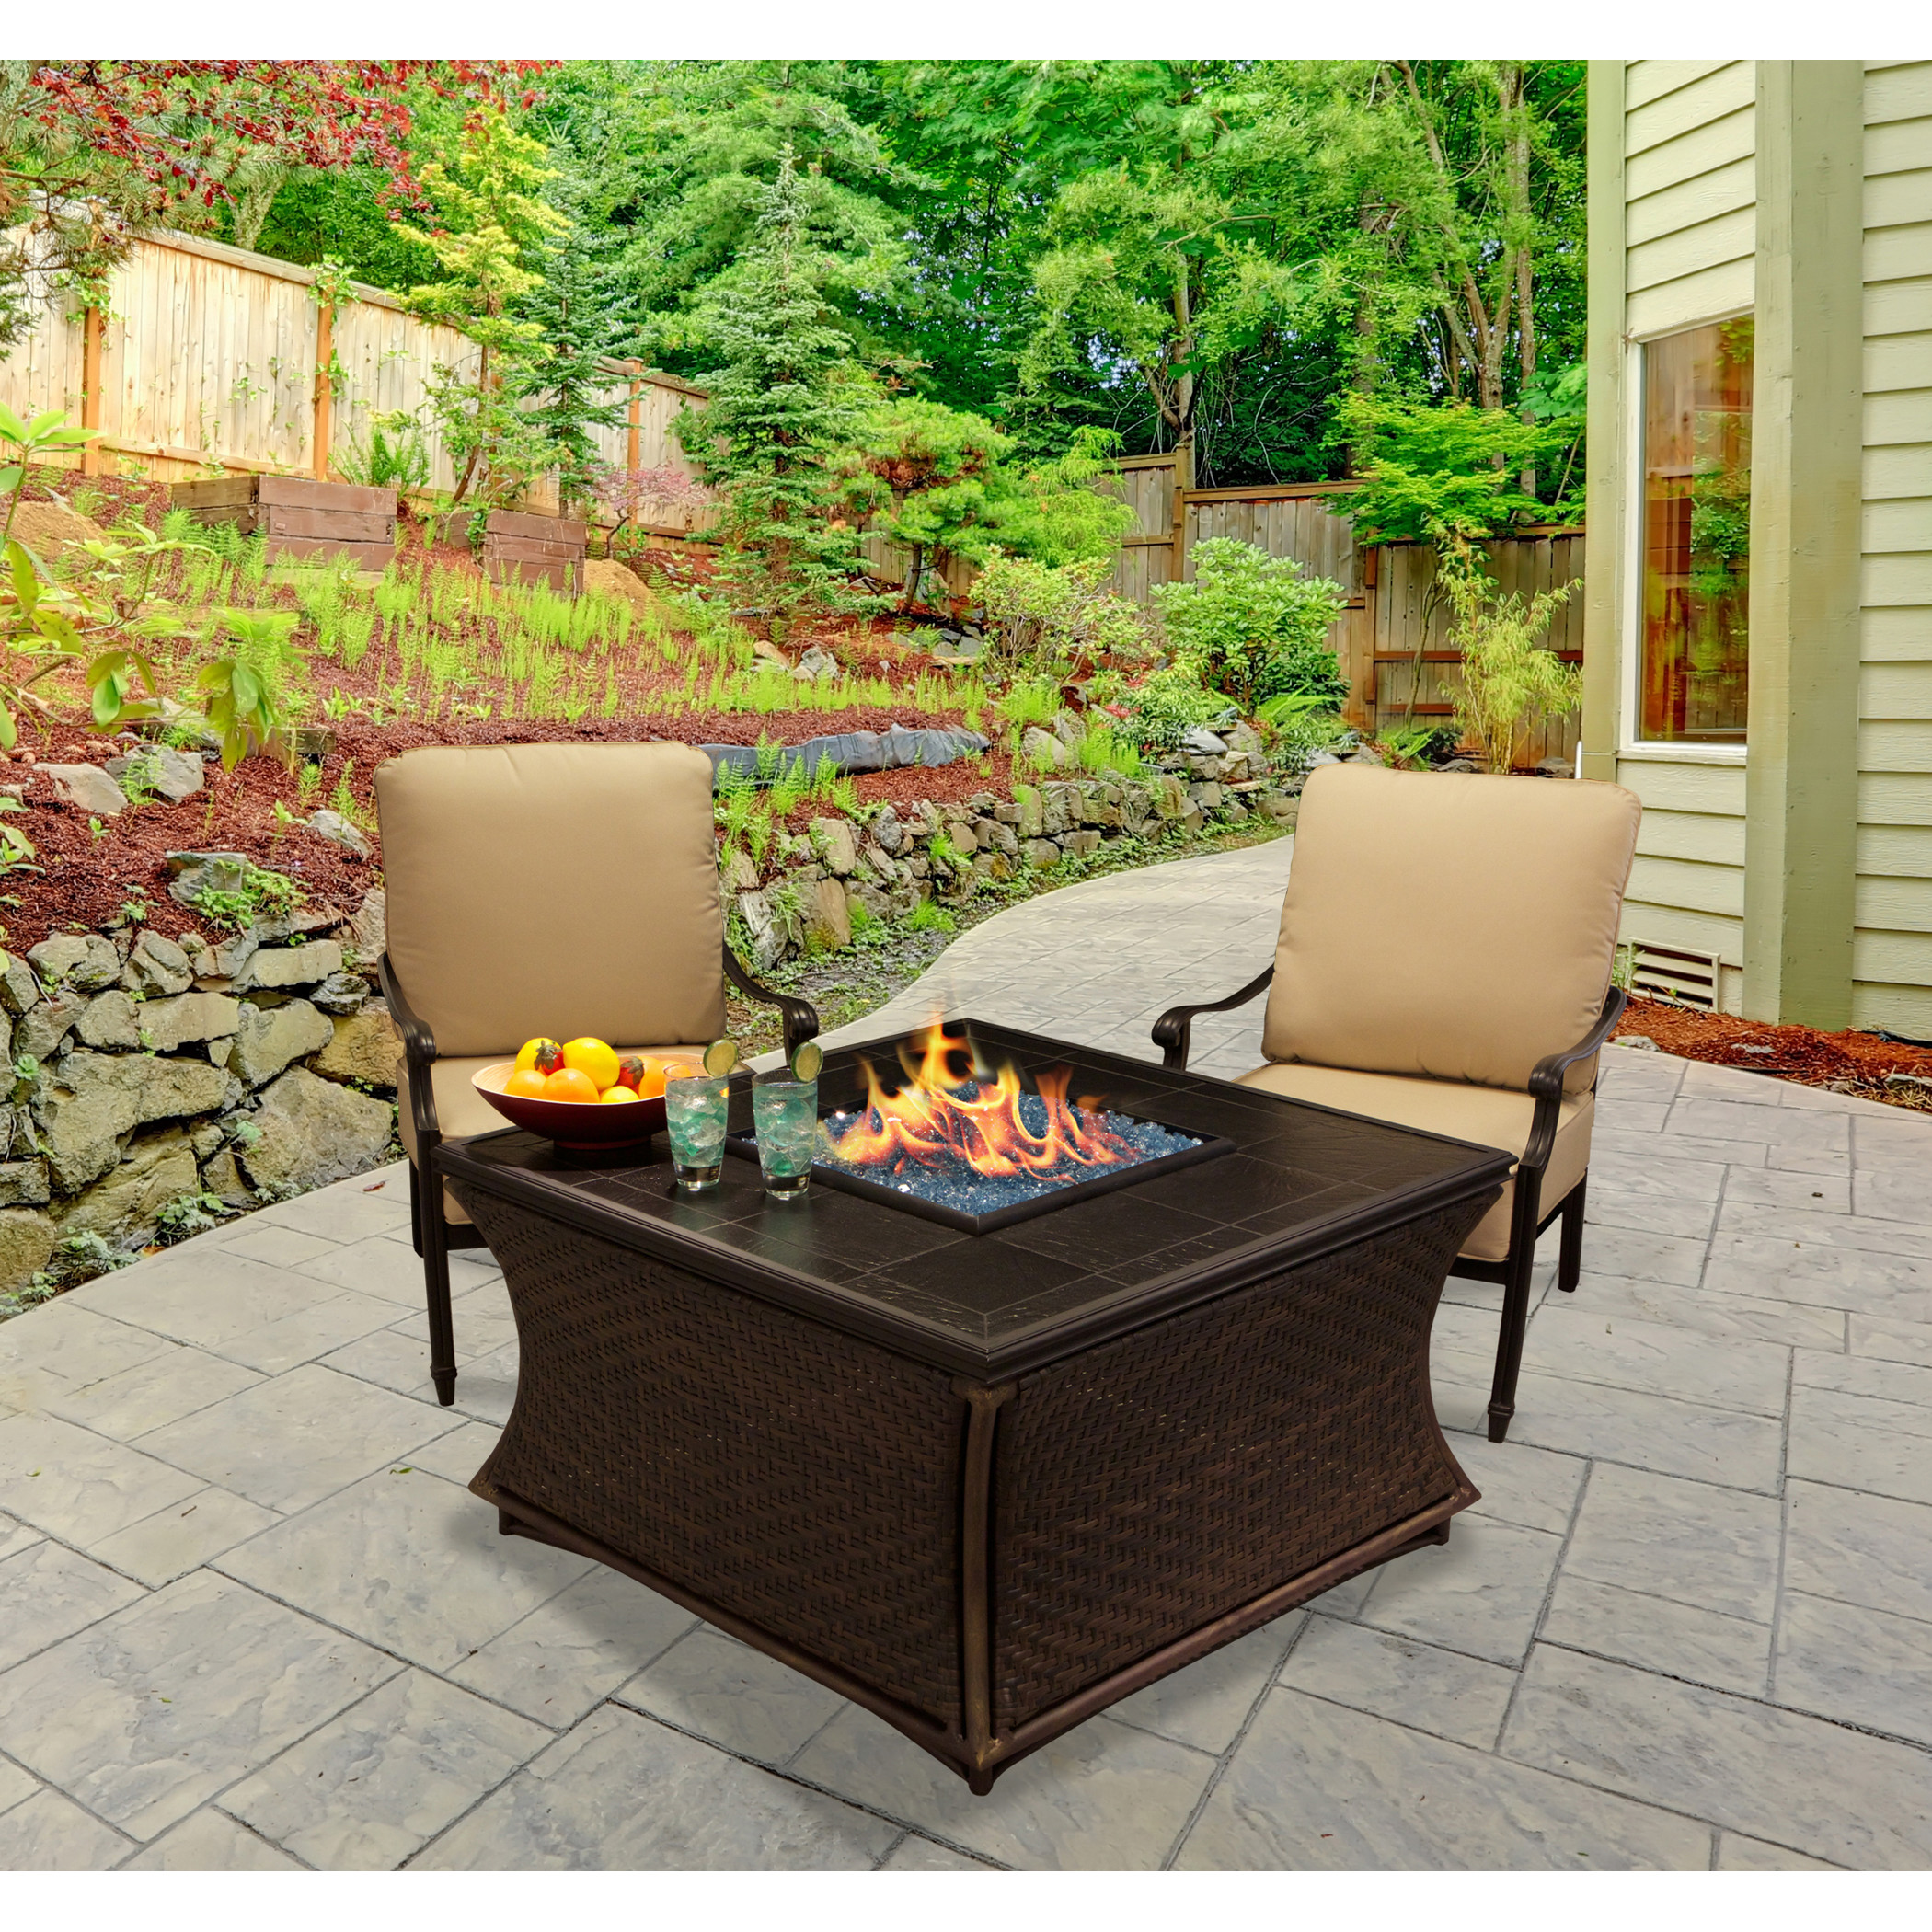 mendocino-square-chat-height-fire-pit-brown-handwoven-wicker-base-faux-slate-top-blue-glass